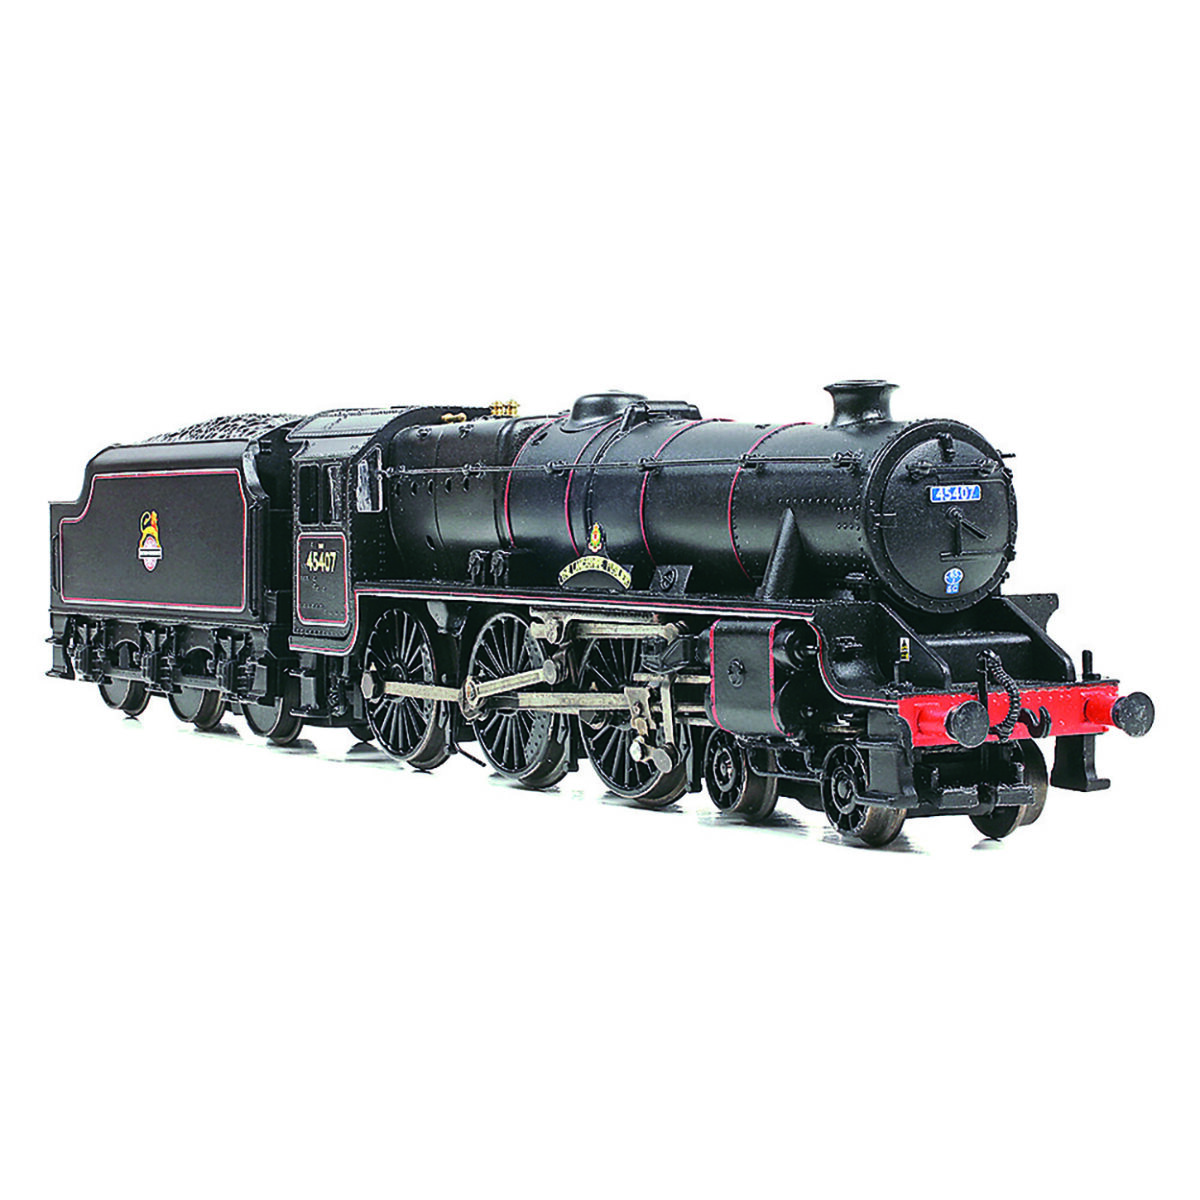 Bachmann reveals plethora of models in summer announcement